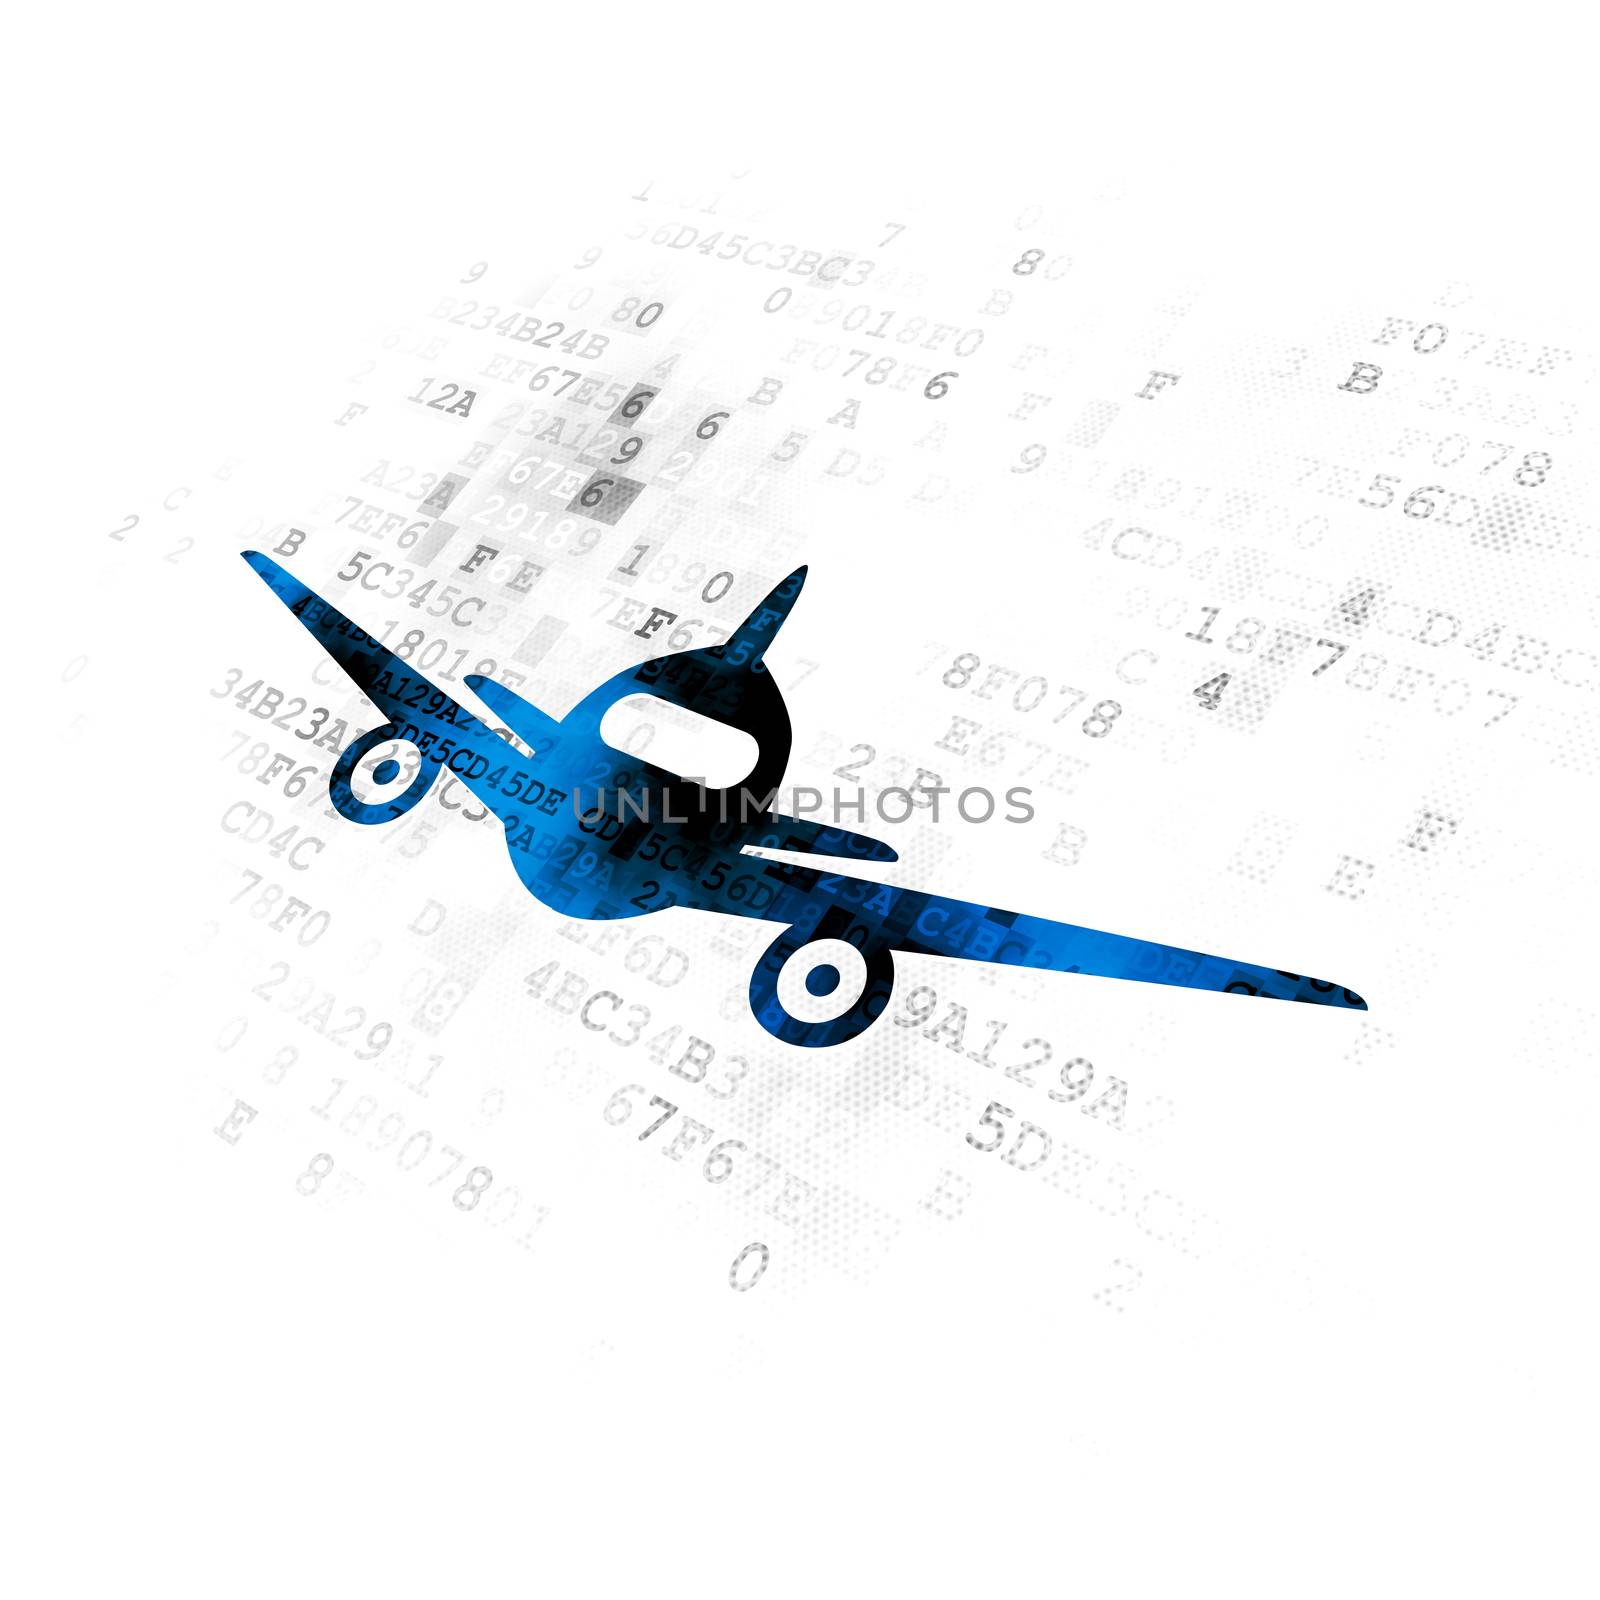 Tourism concept: Pixelated blue Aircraft icon on Digital background